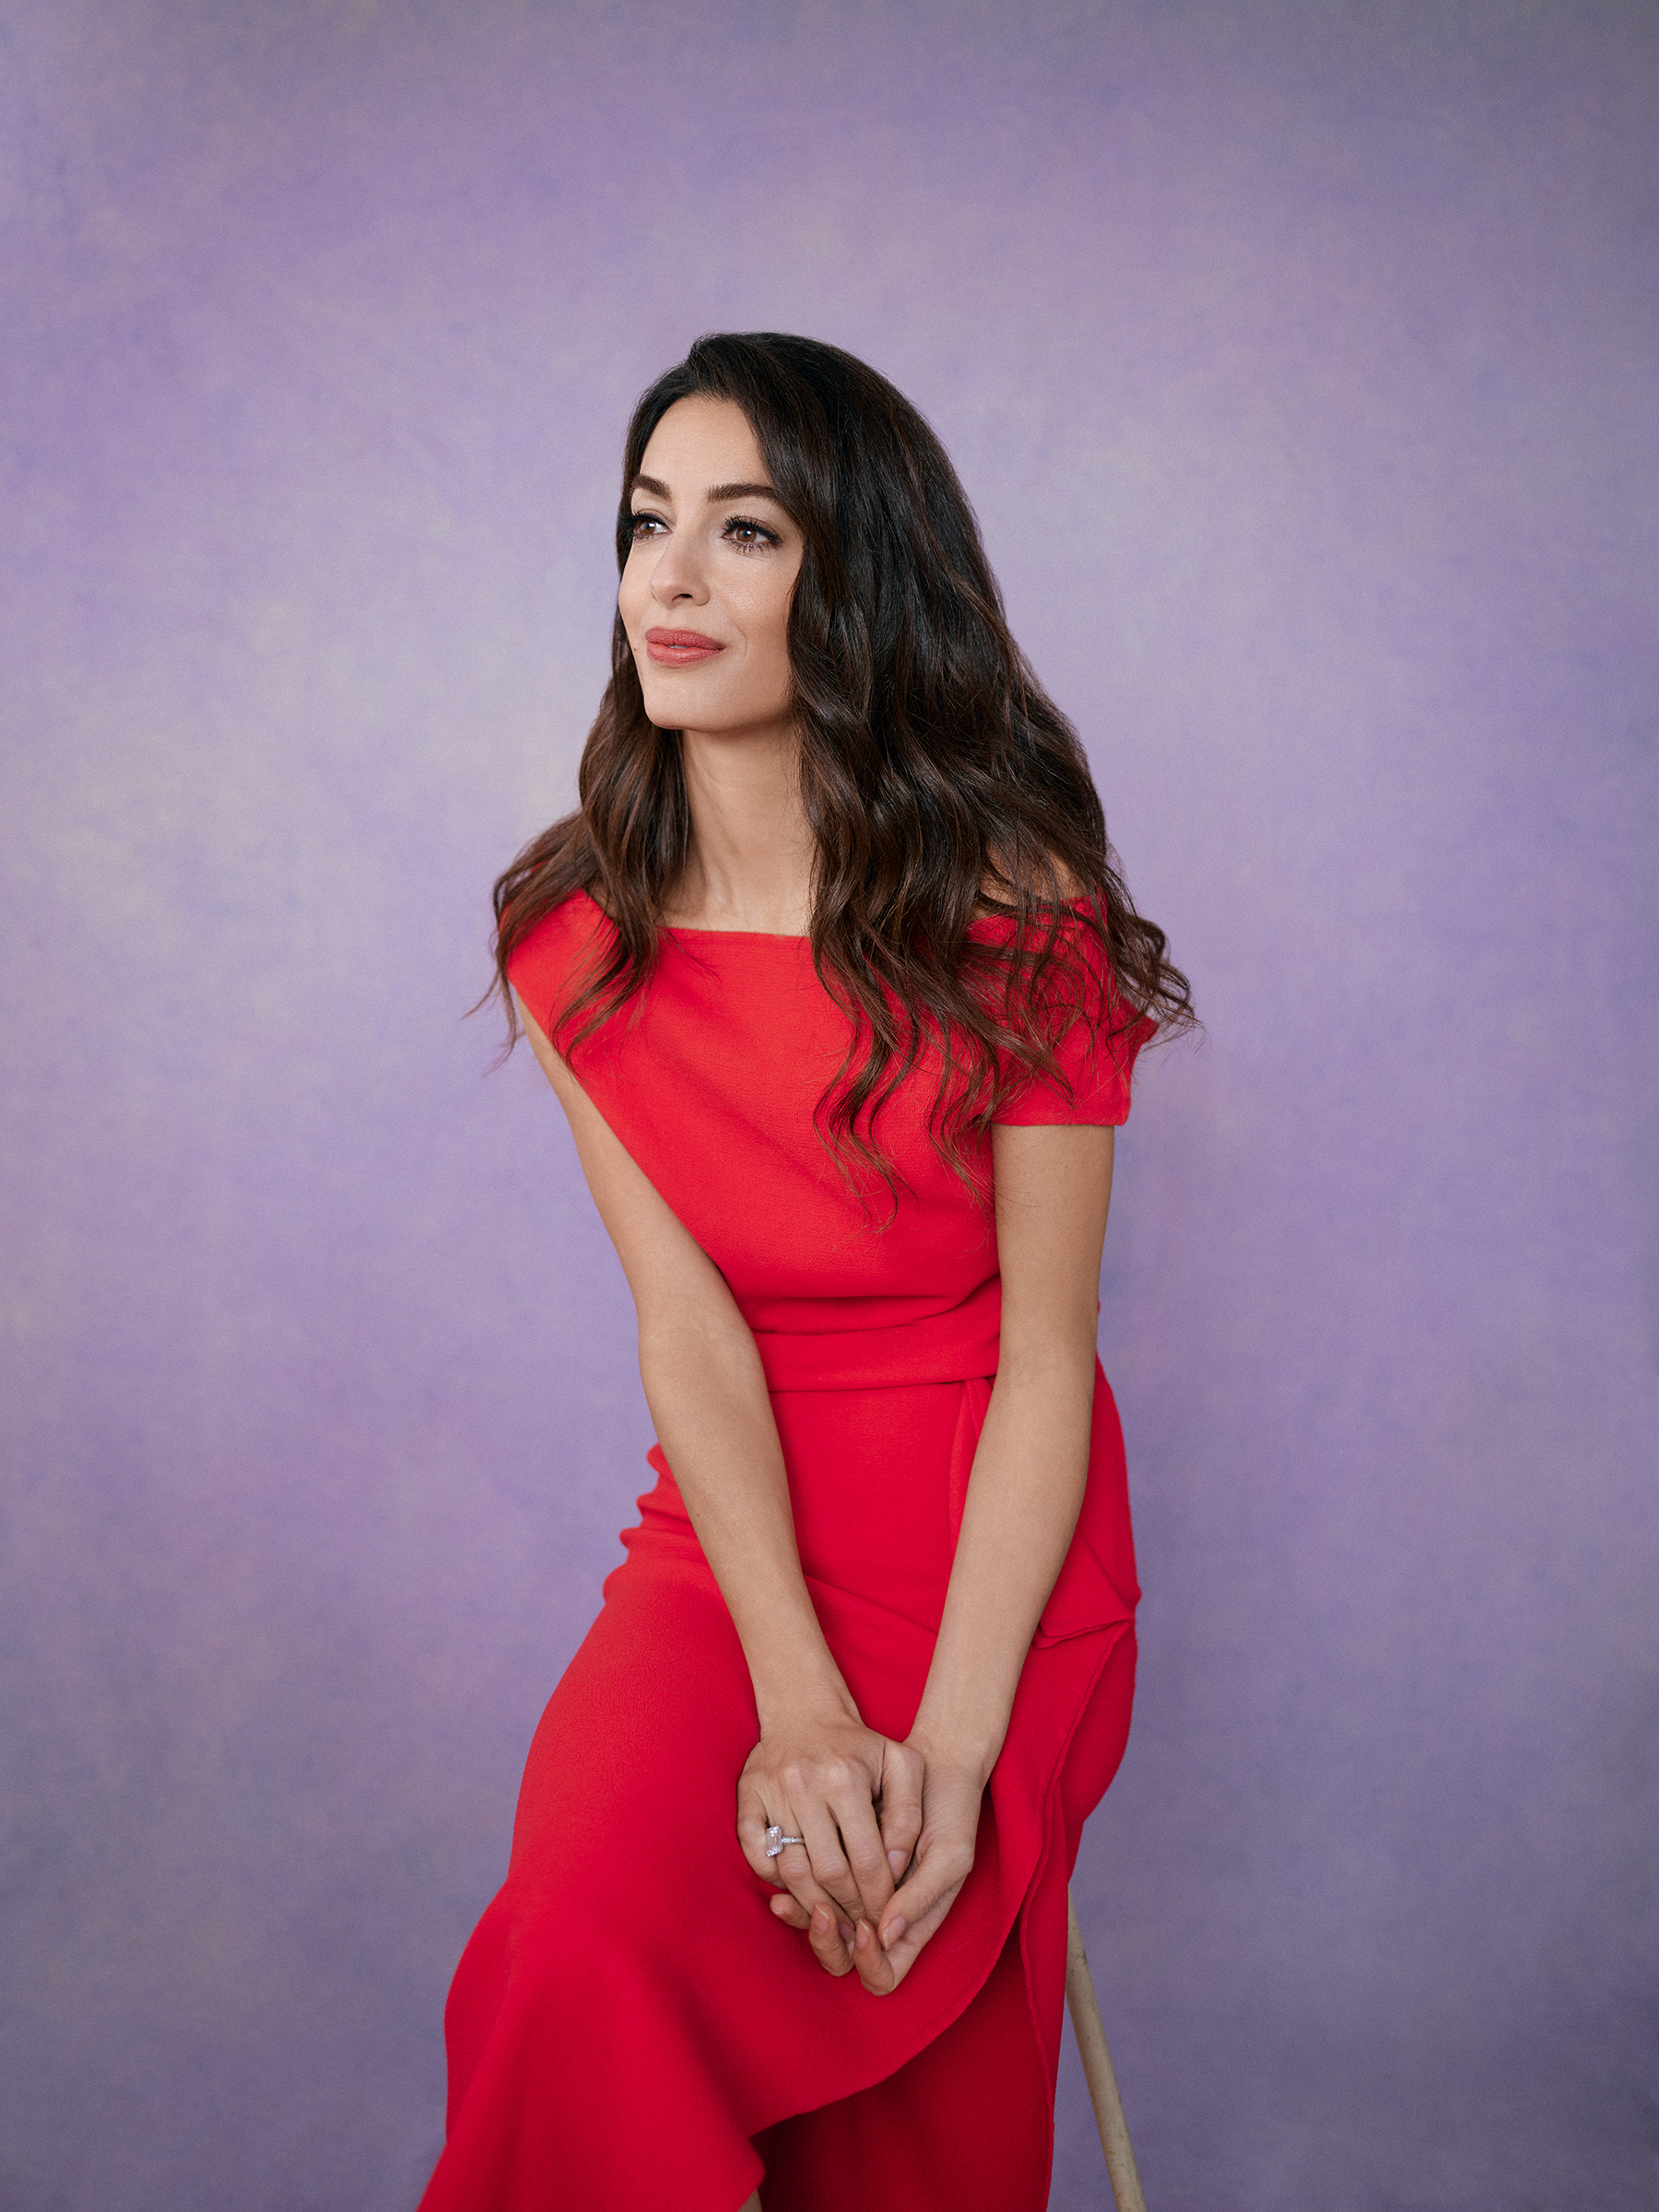 Amal Clooney at her home in England on Feb. 19 (Kristina Varaksina for TIME)